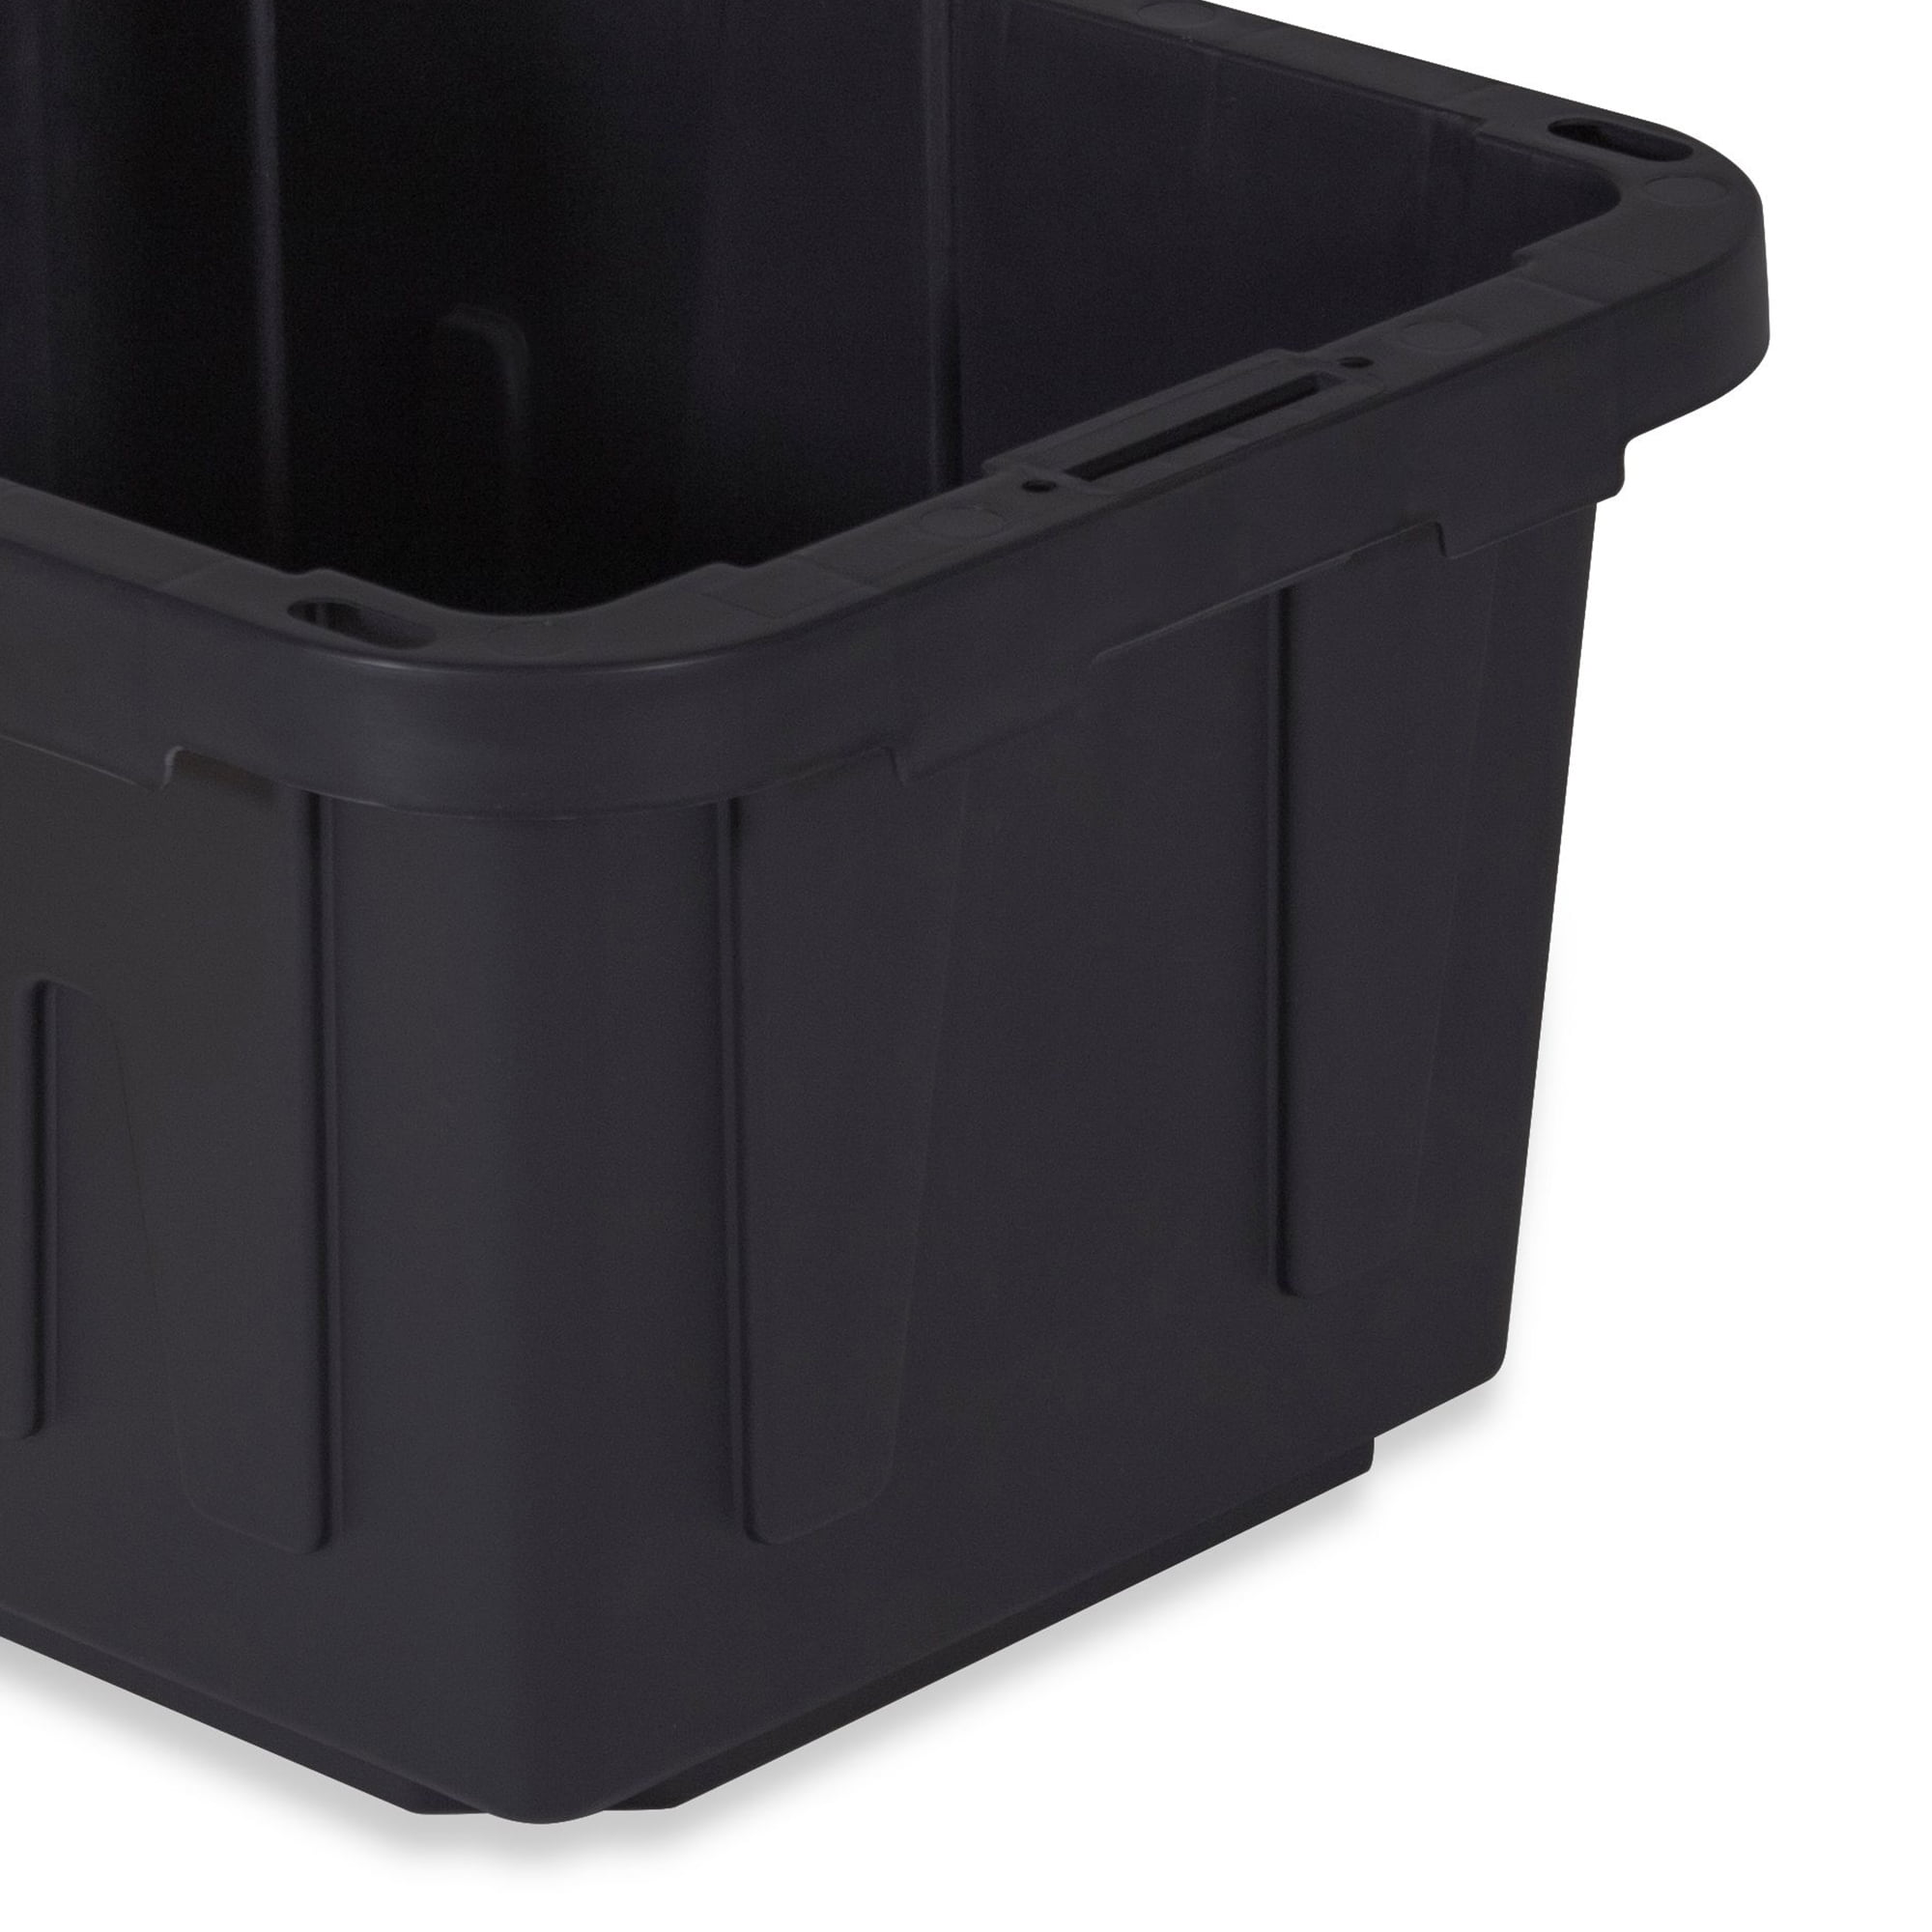 CX BLACK & YELLOW® 5-Gallon Tough Storage Containers with Lids, Stackable,  6-Pac